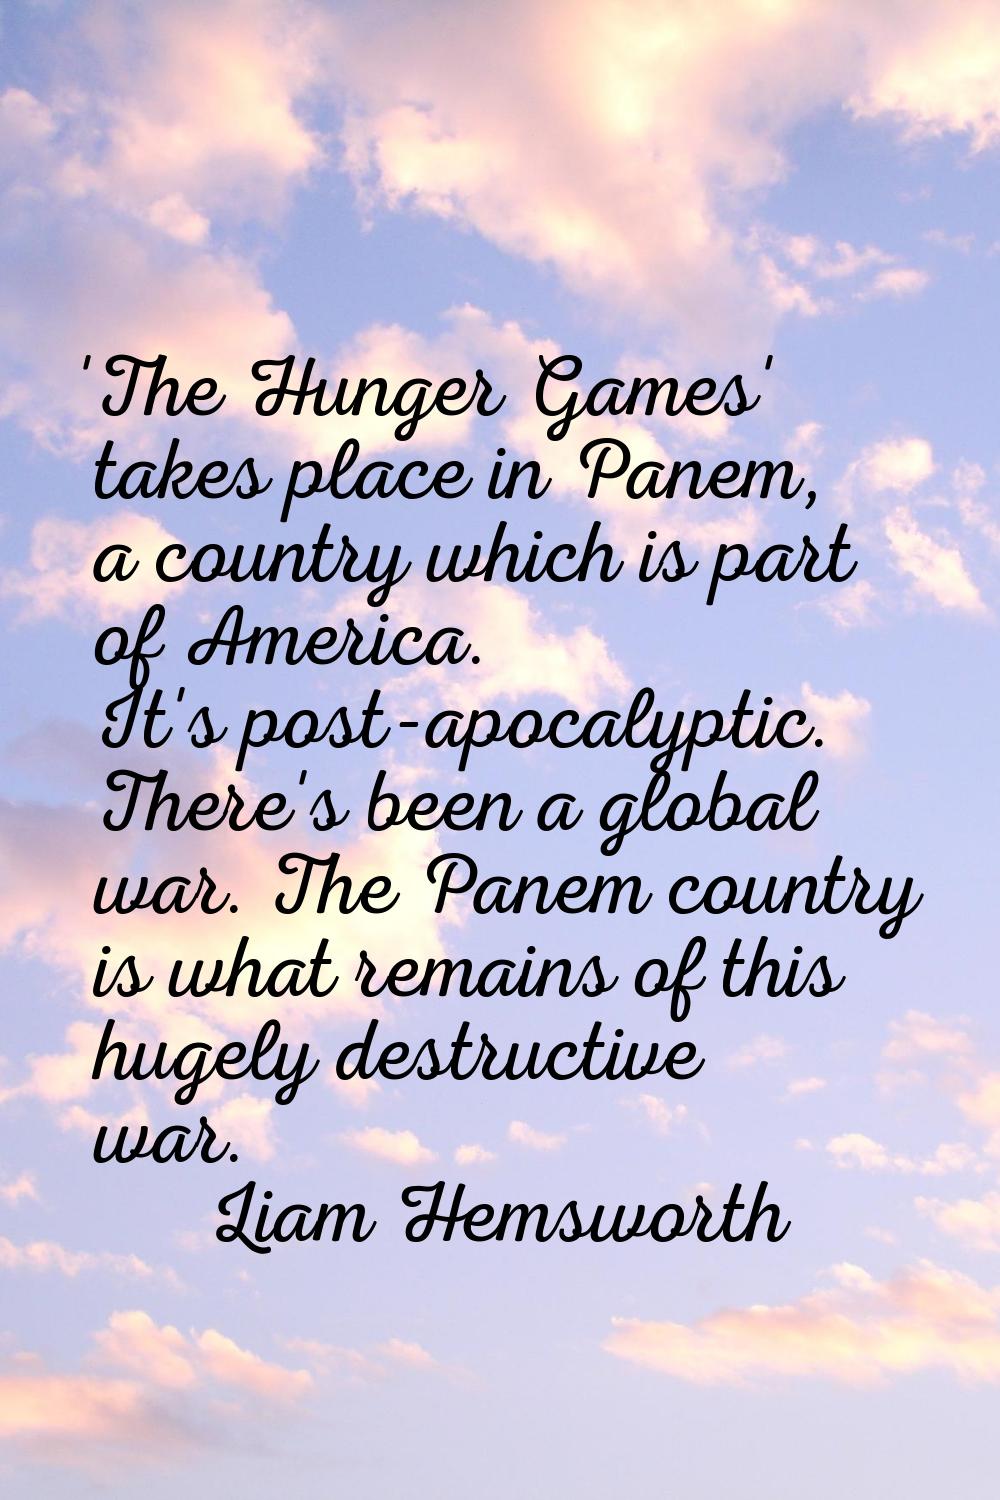 'The Hunger Games' takes place in Panem, a country which is part of America. It's post-apocalyptic.